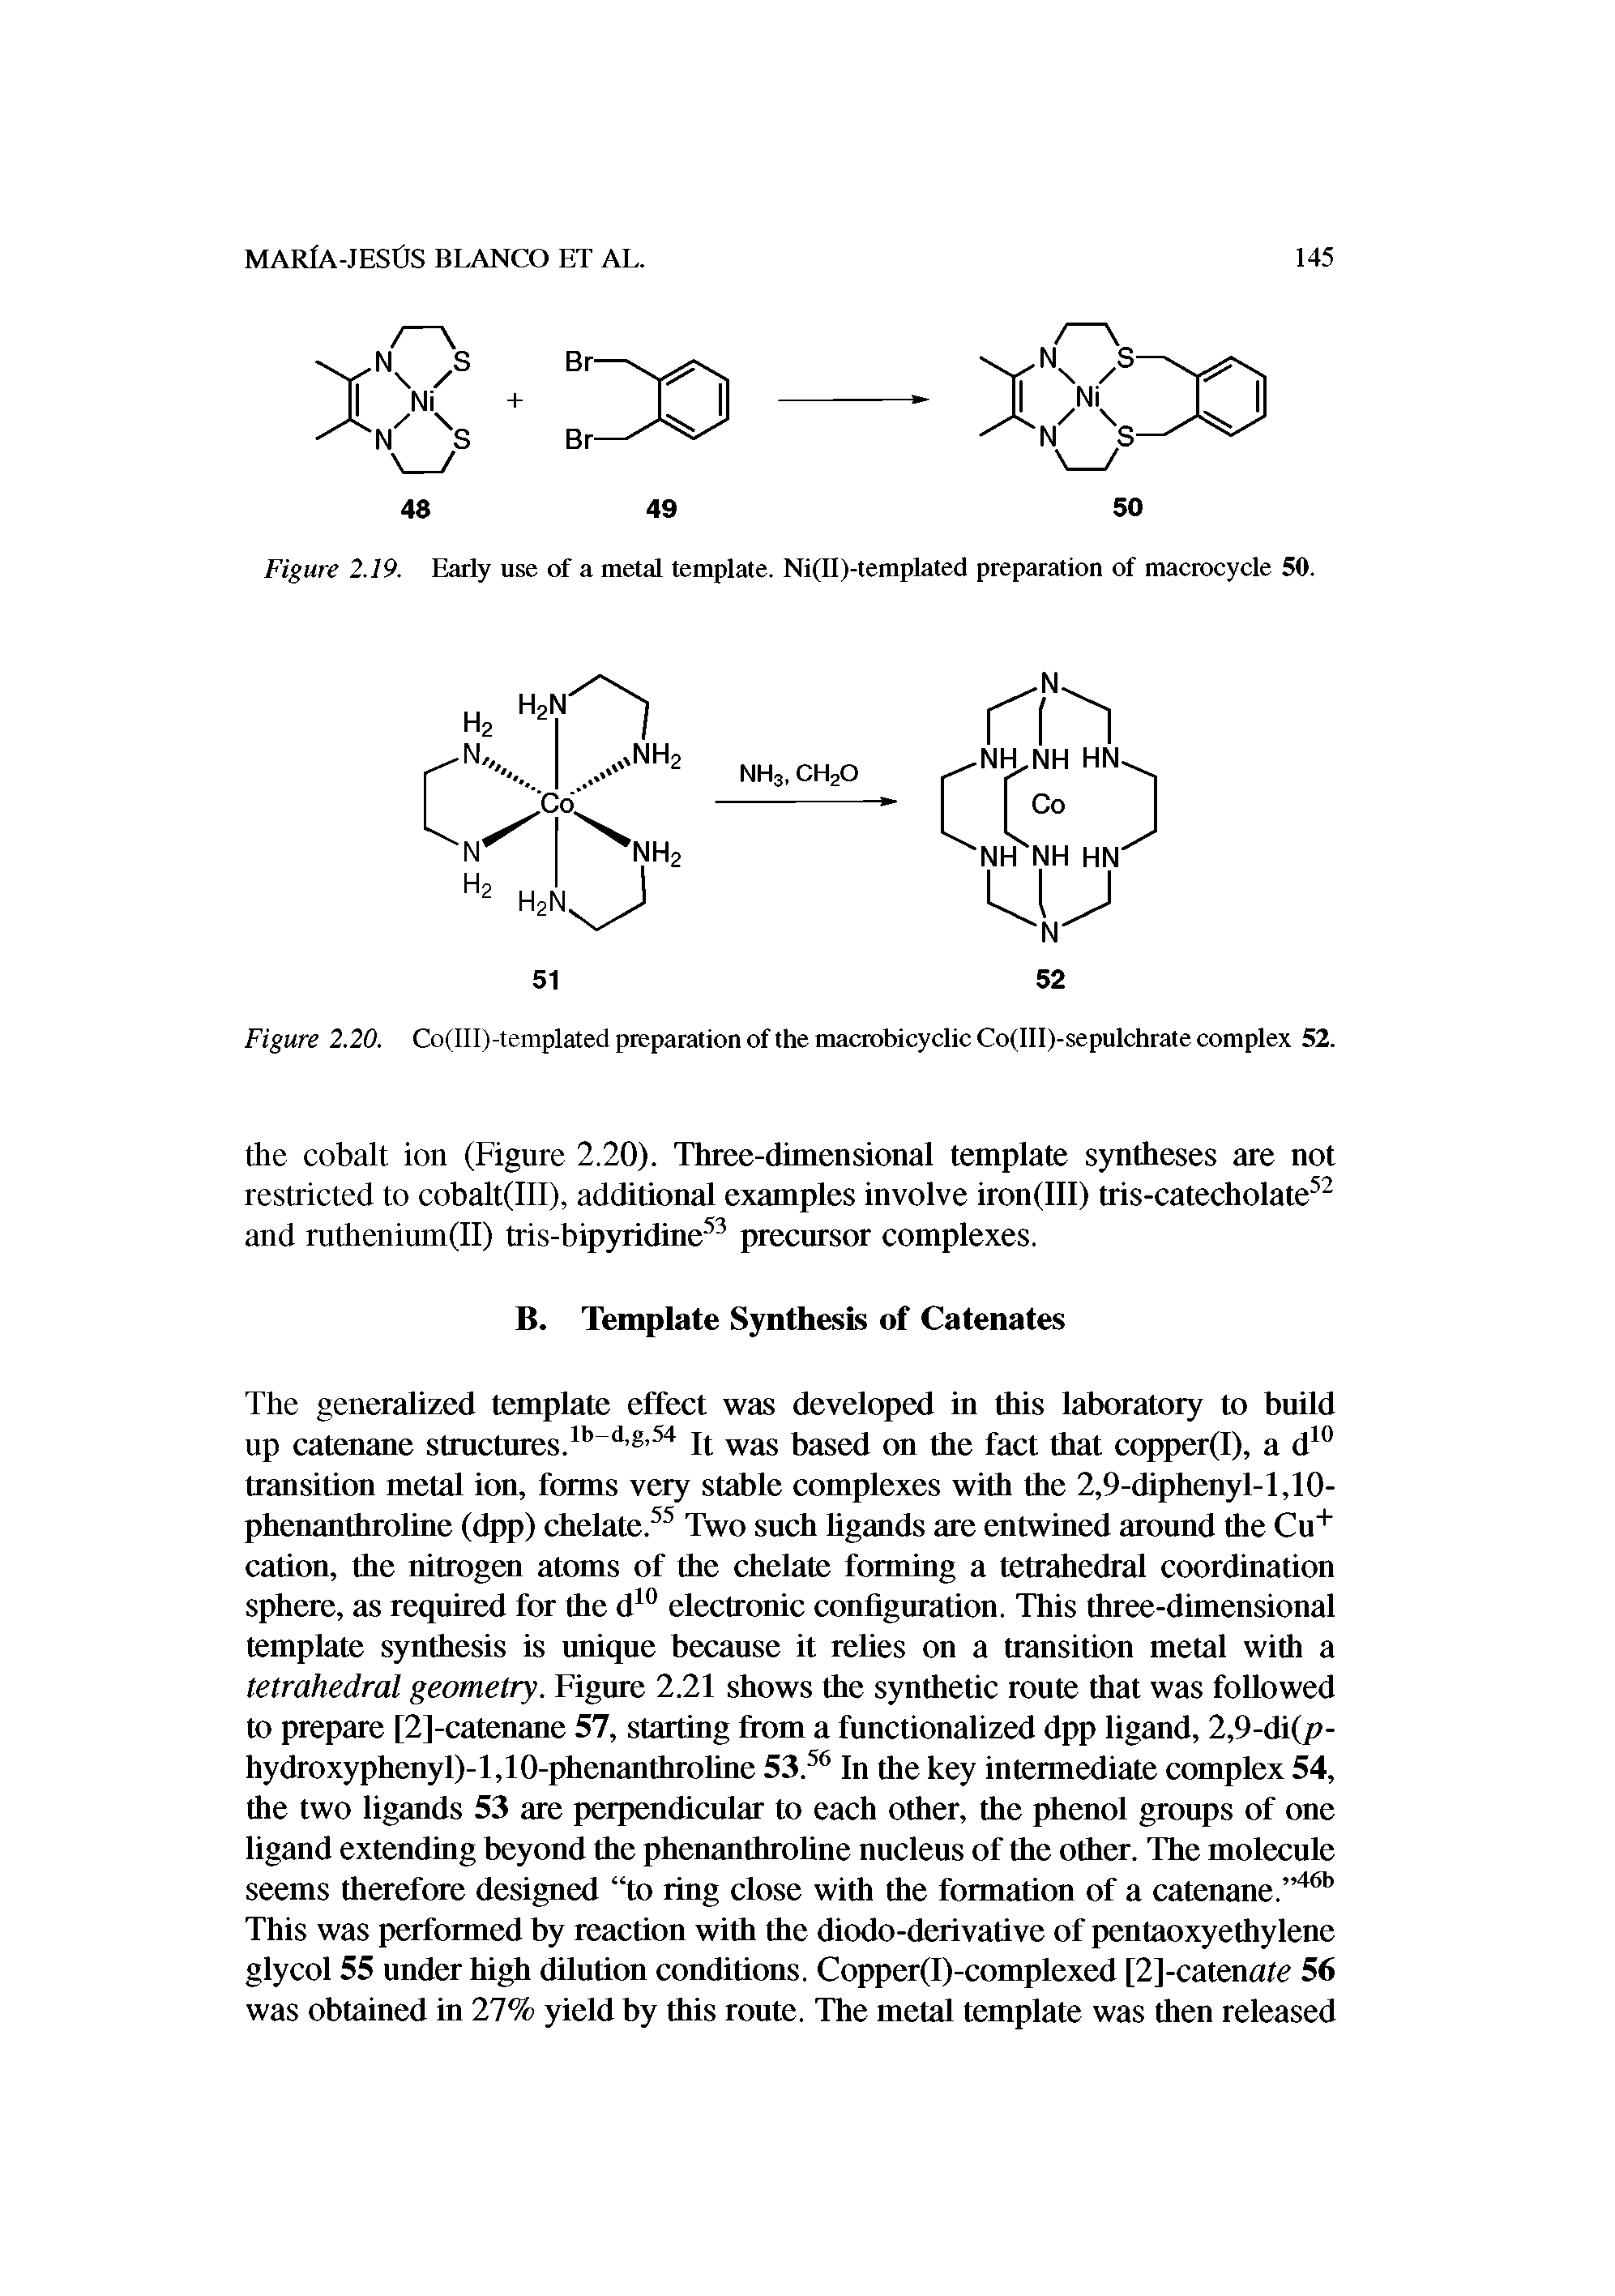 Figure 2.20. Co(III)-templated preparation of the macrobicyclicCo(III)-sepulchrate complex 52.